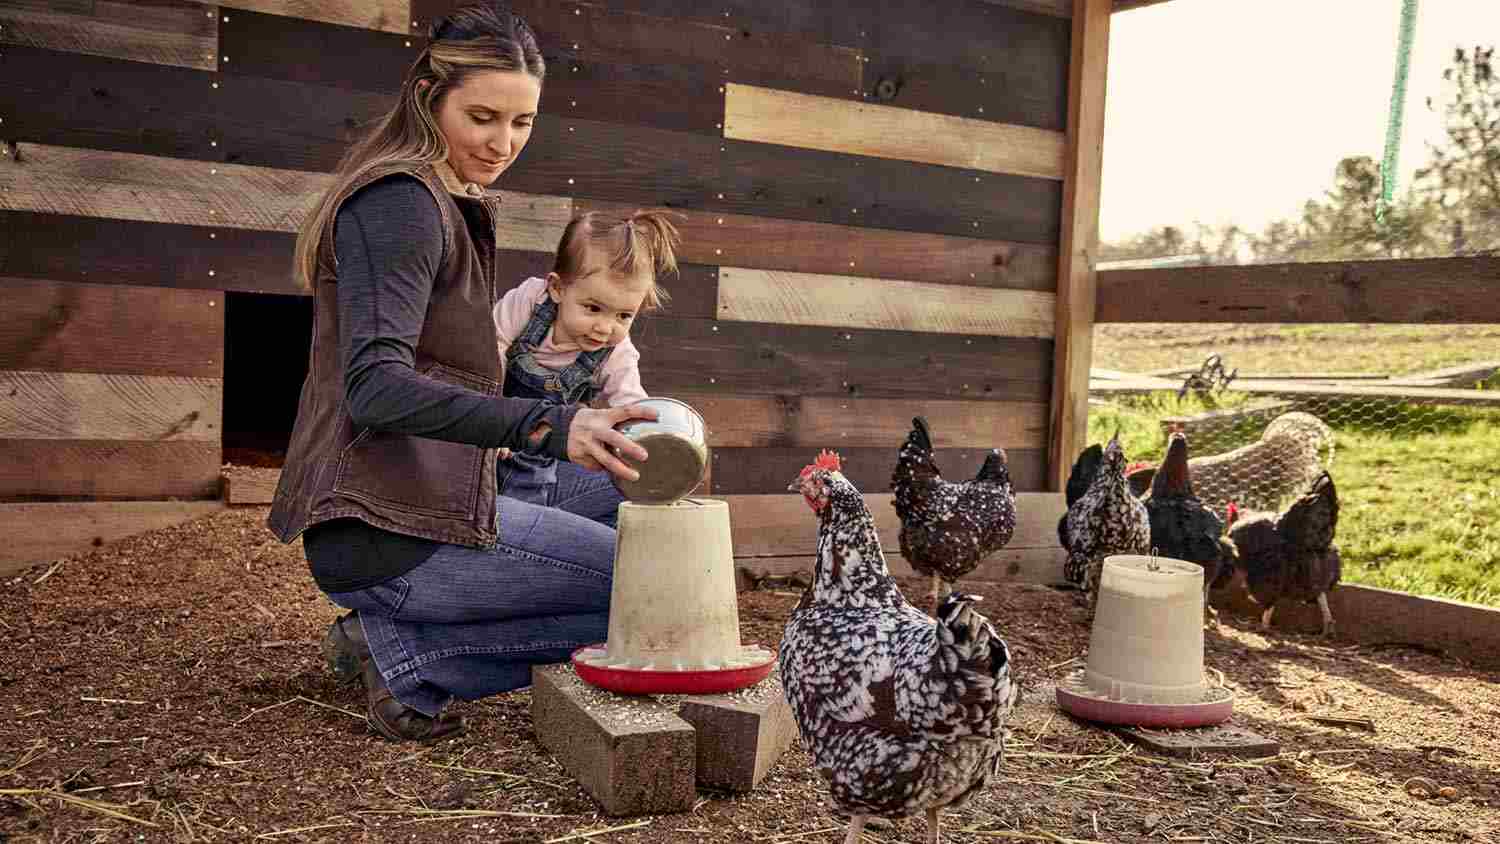 A woman feeds birds while carrying a child in a chicken coop on a farm.